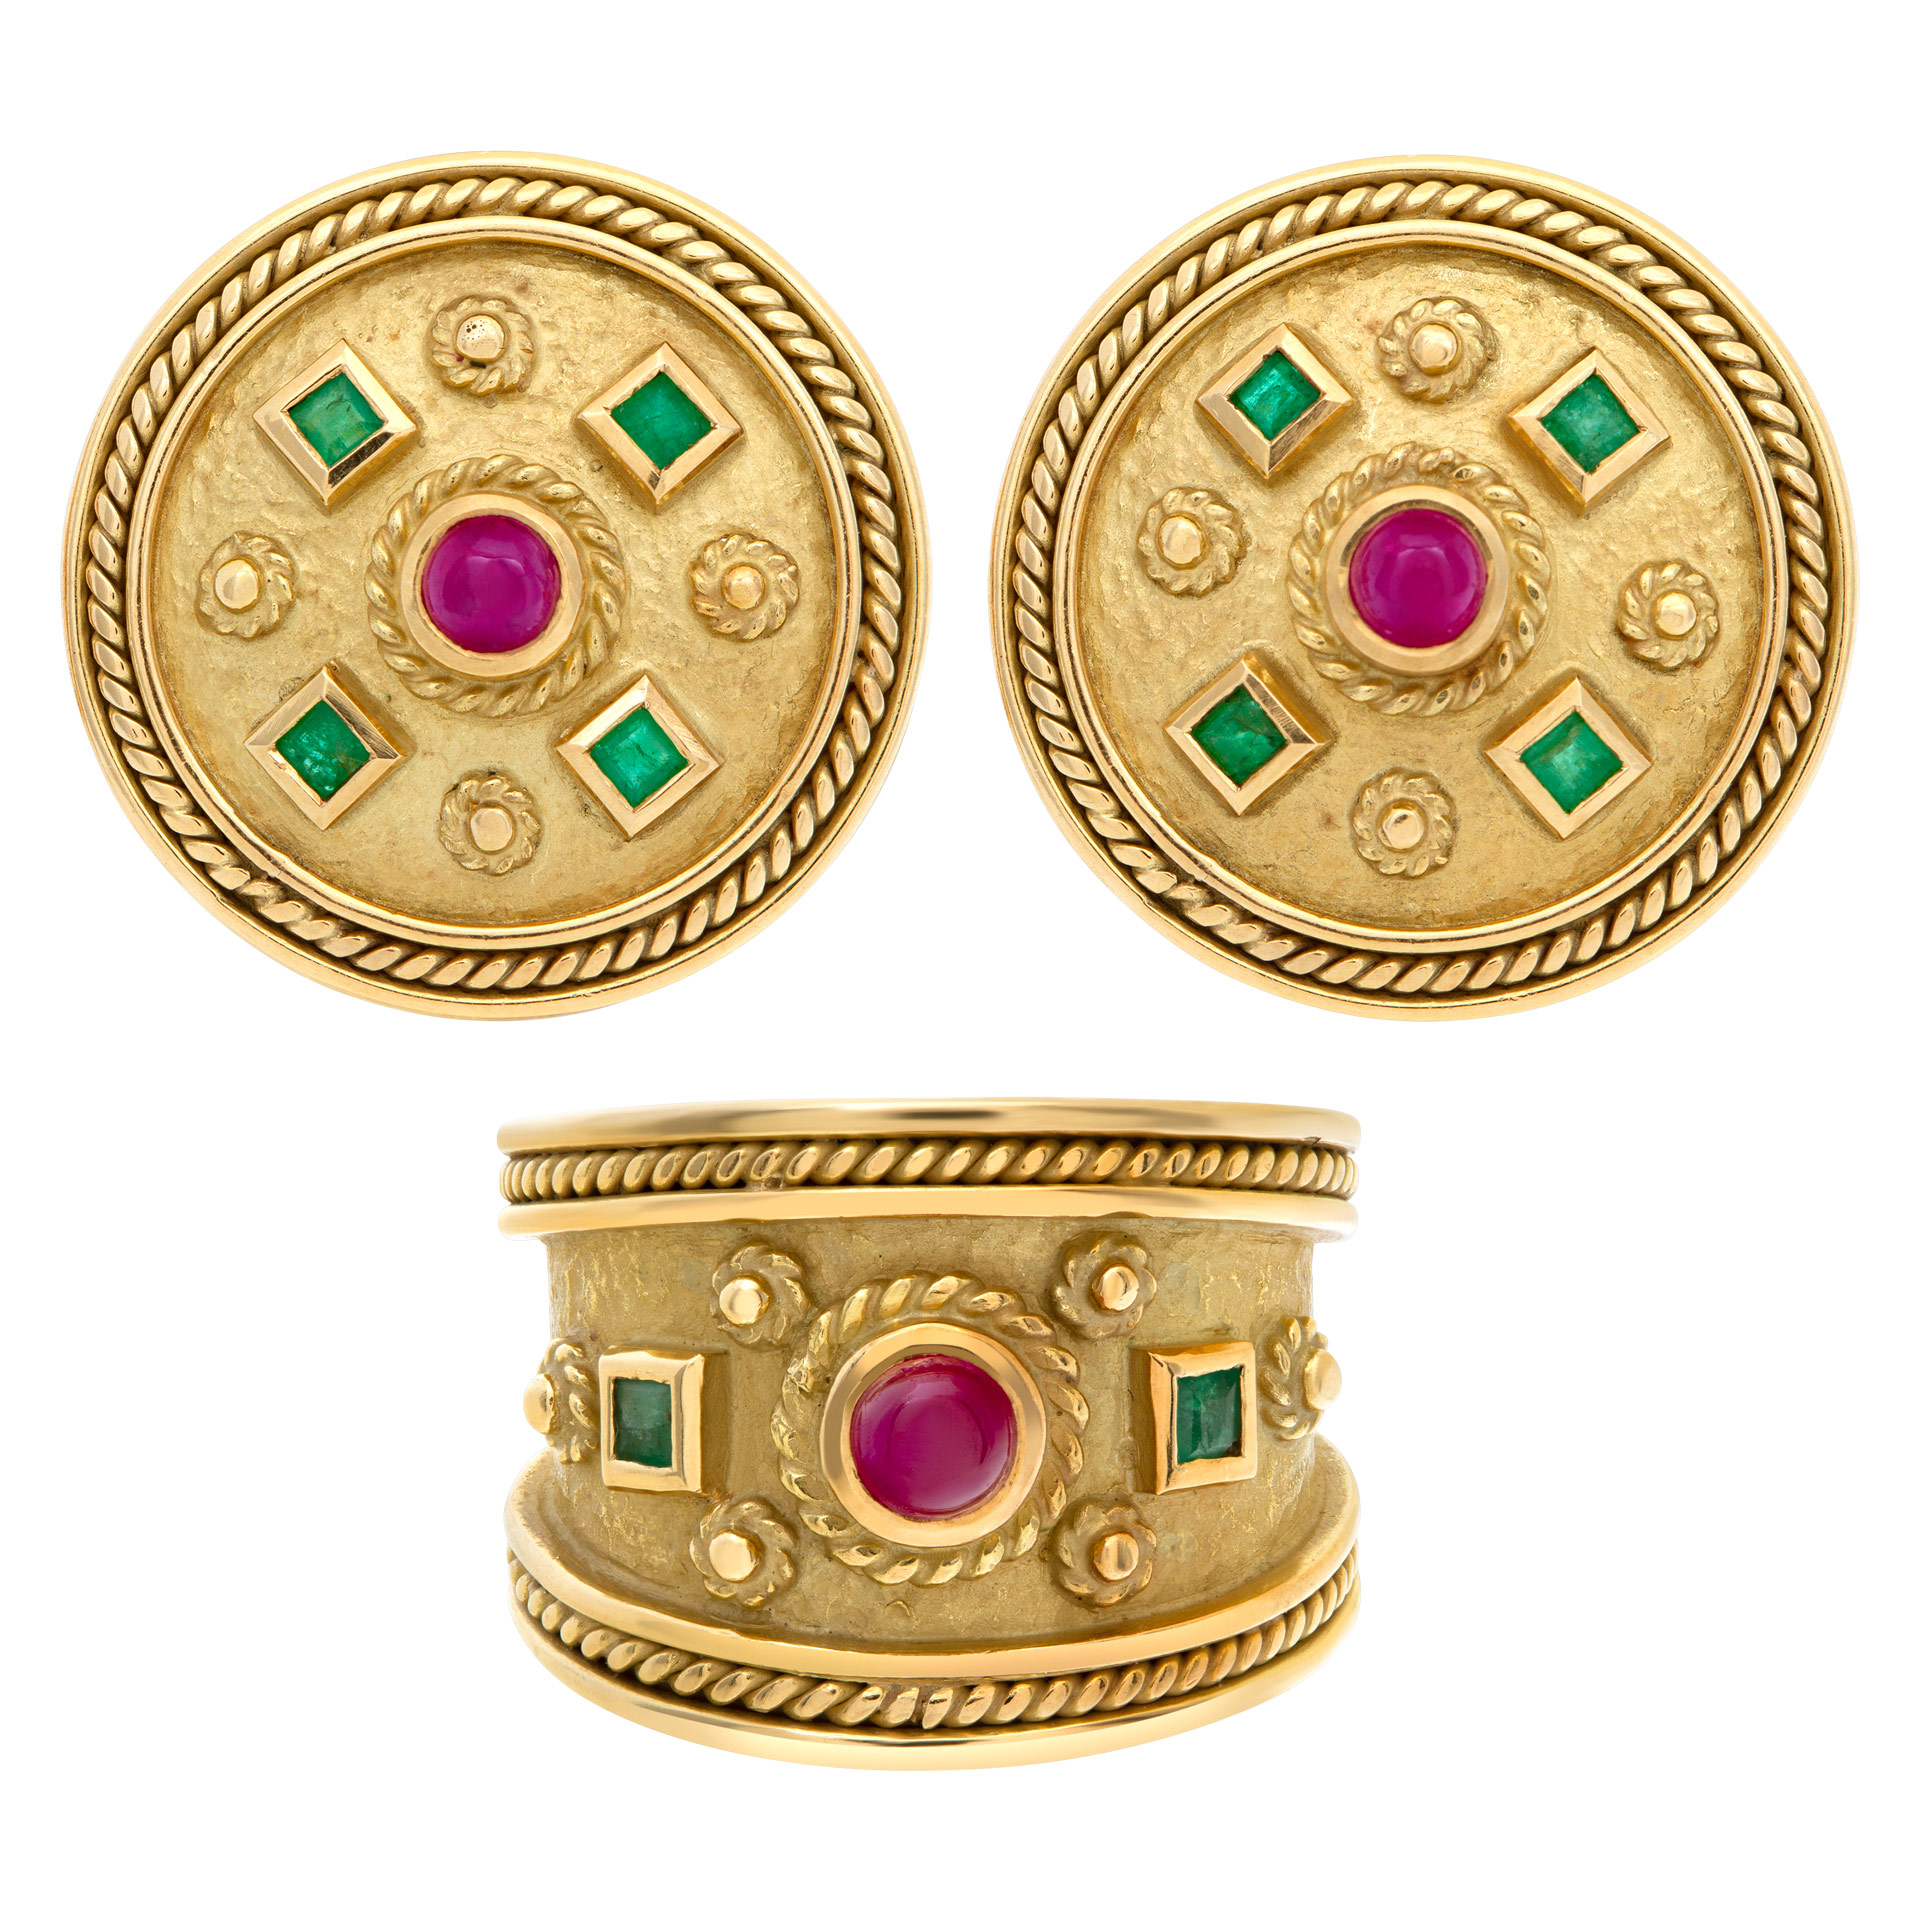 Azteca design earring & ring set in 18k yellow gold with cabachon rubies & square cut emeralds